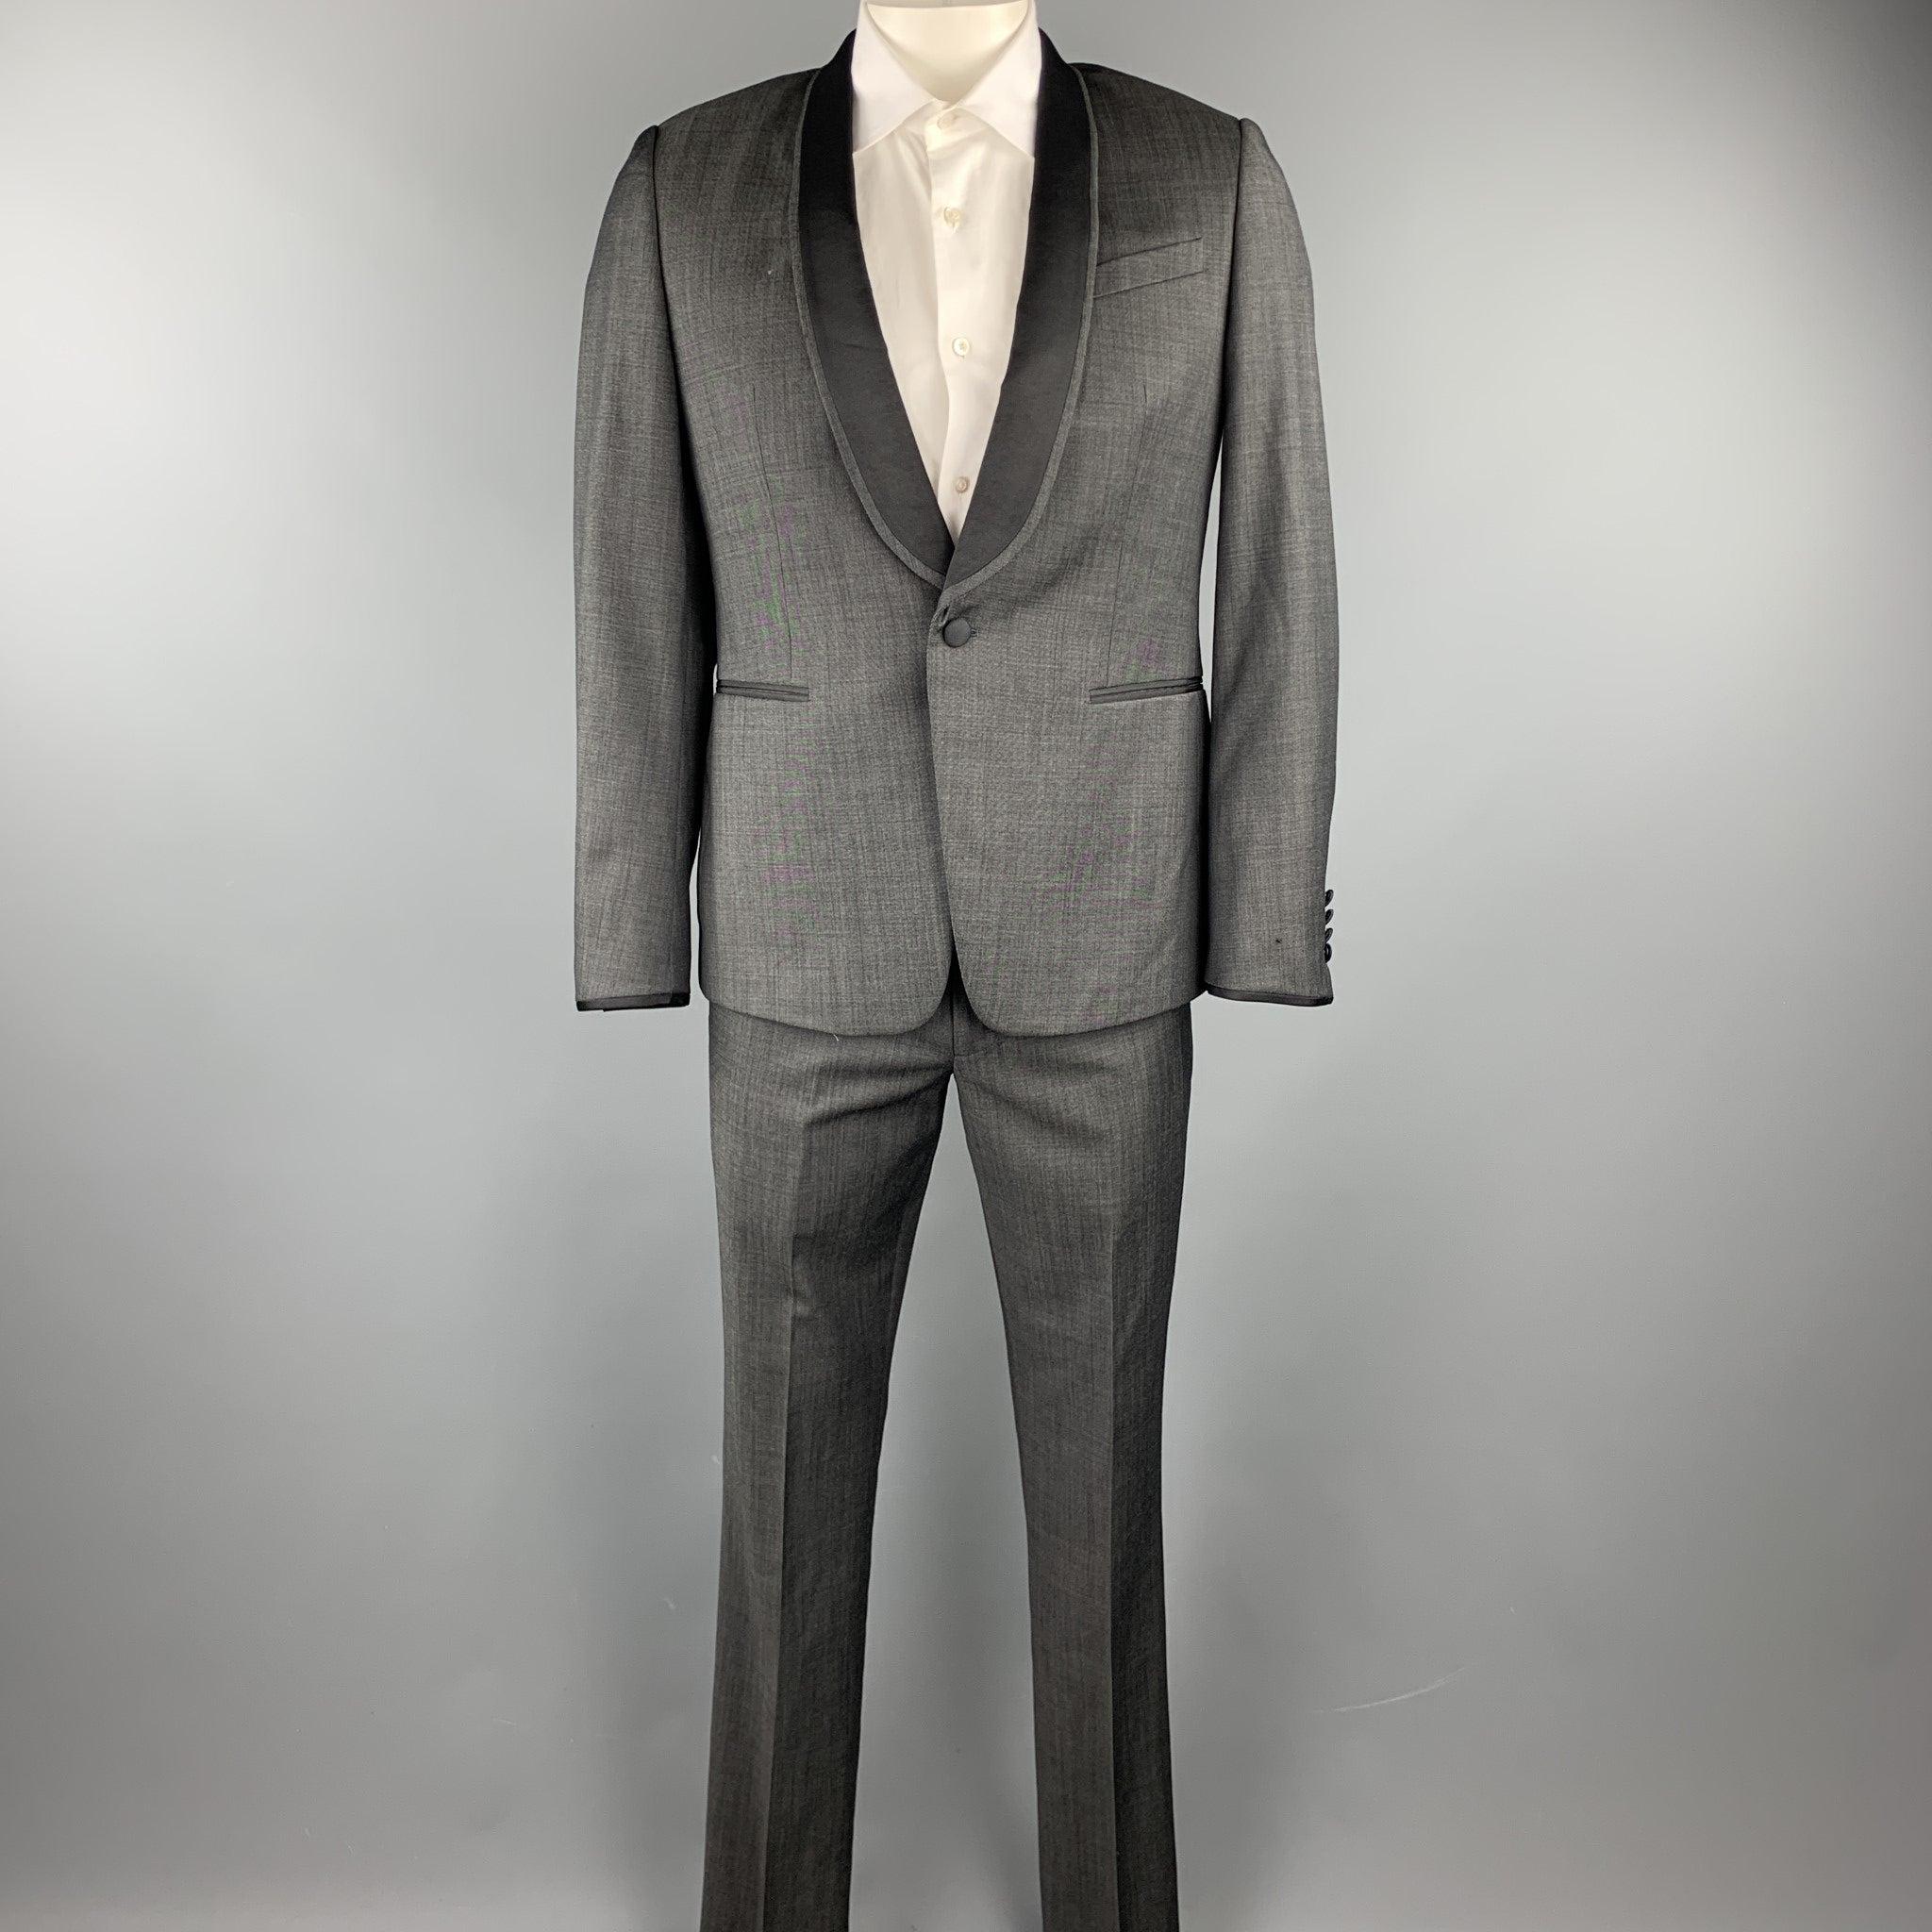 PAUL SMITH tuxedo
suit comes in a charcoal wool with a full gray liner and includes a single breasted, single button sport coat with shawl lapel and matching flat front trousers. As-Is. Made in Italy.Very Good Pre-Owned Condition. 

Marked:   R 40